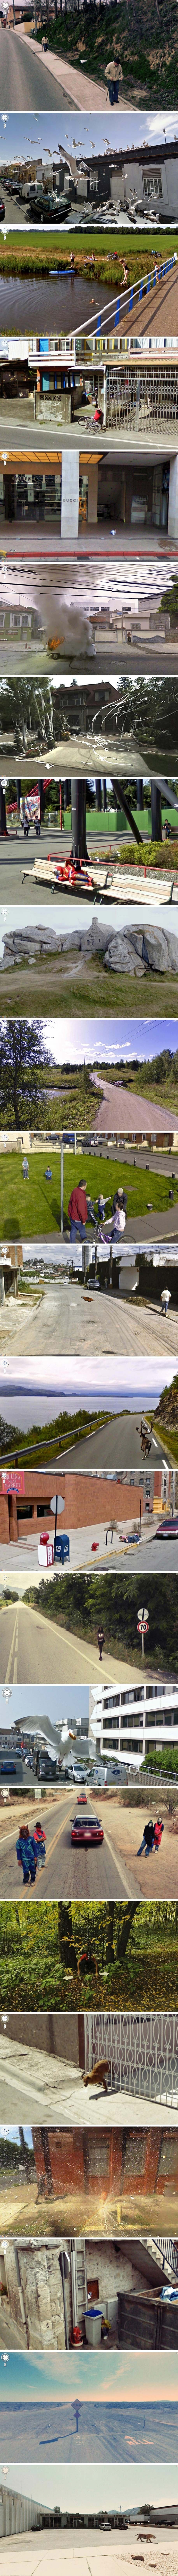 Meanwhile on Google Maps.